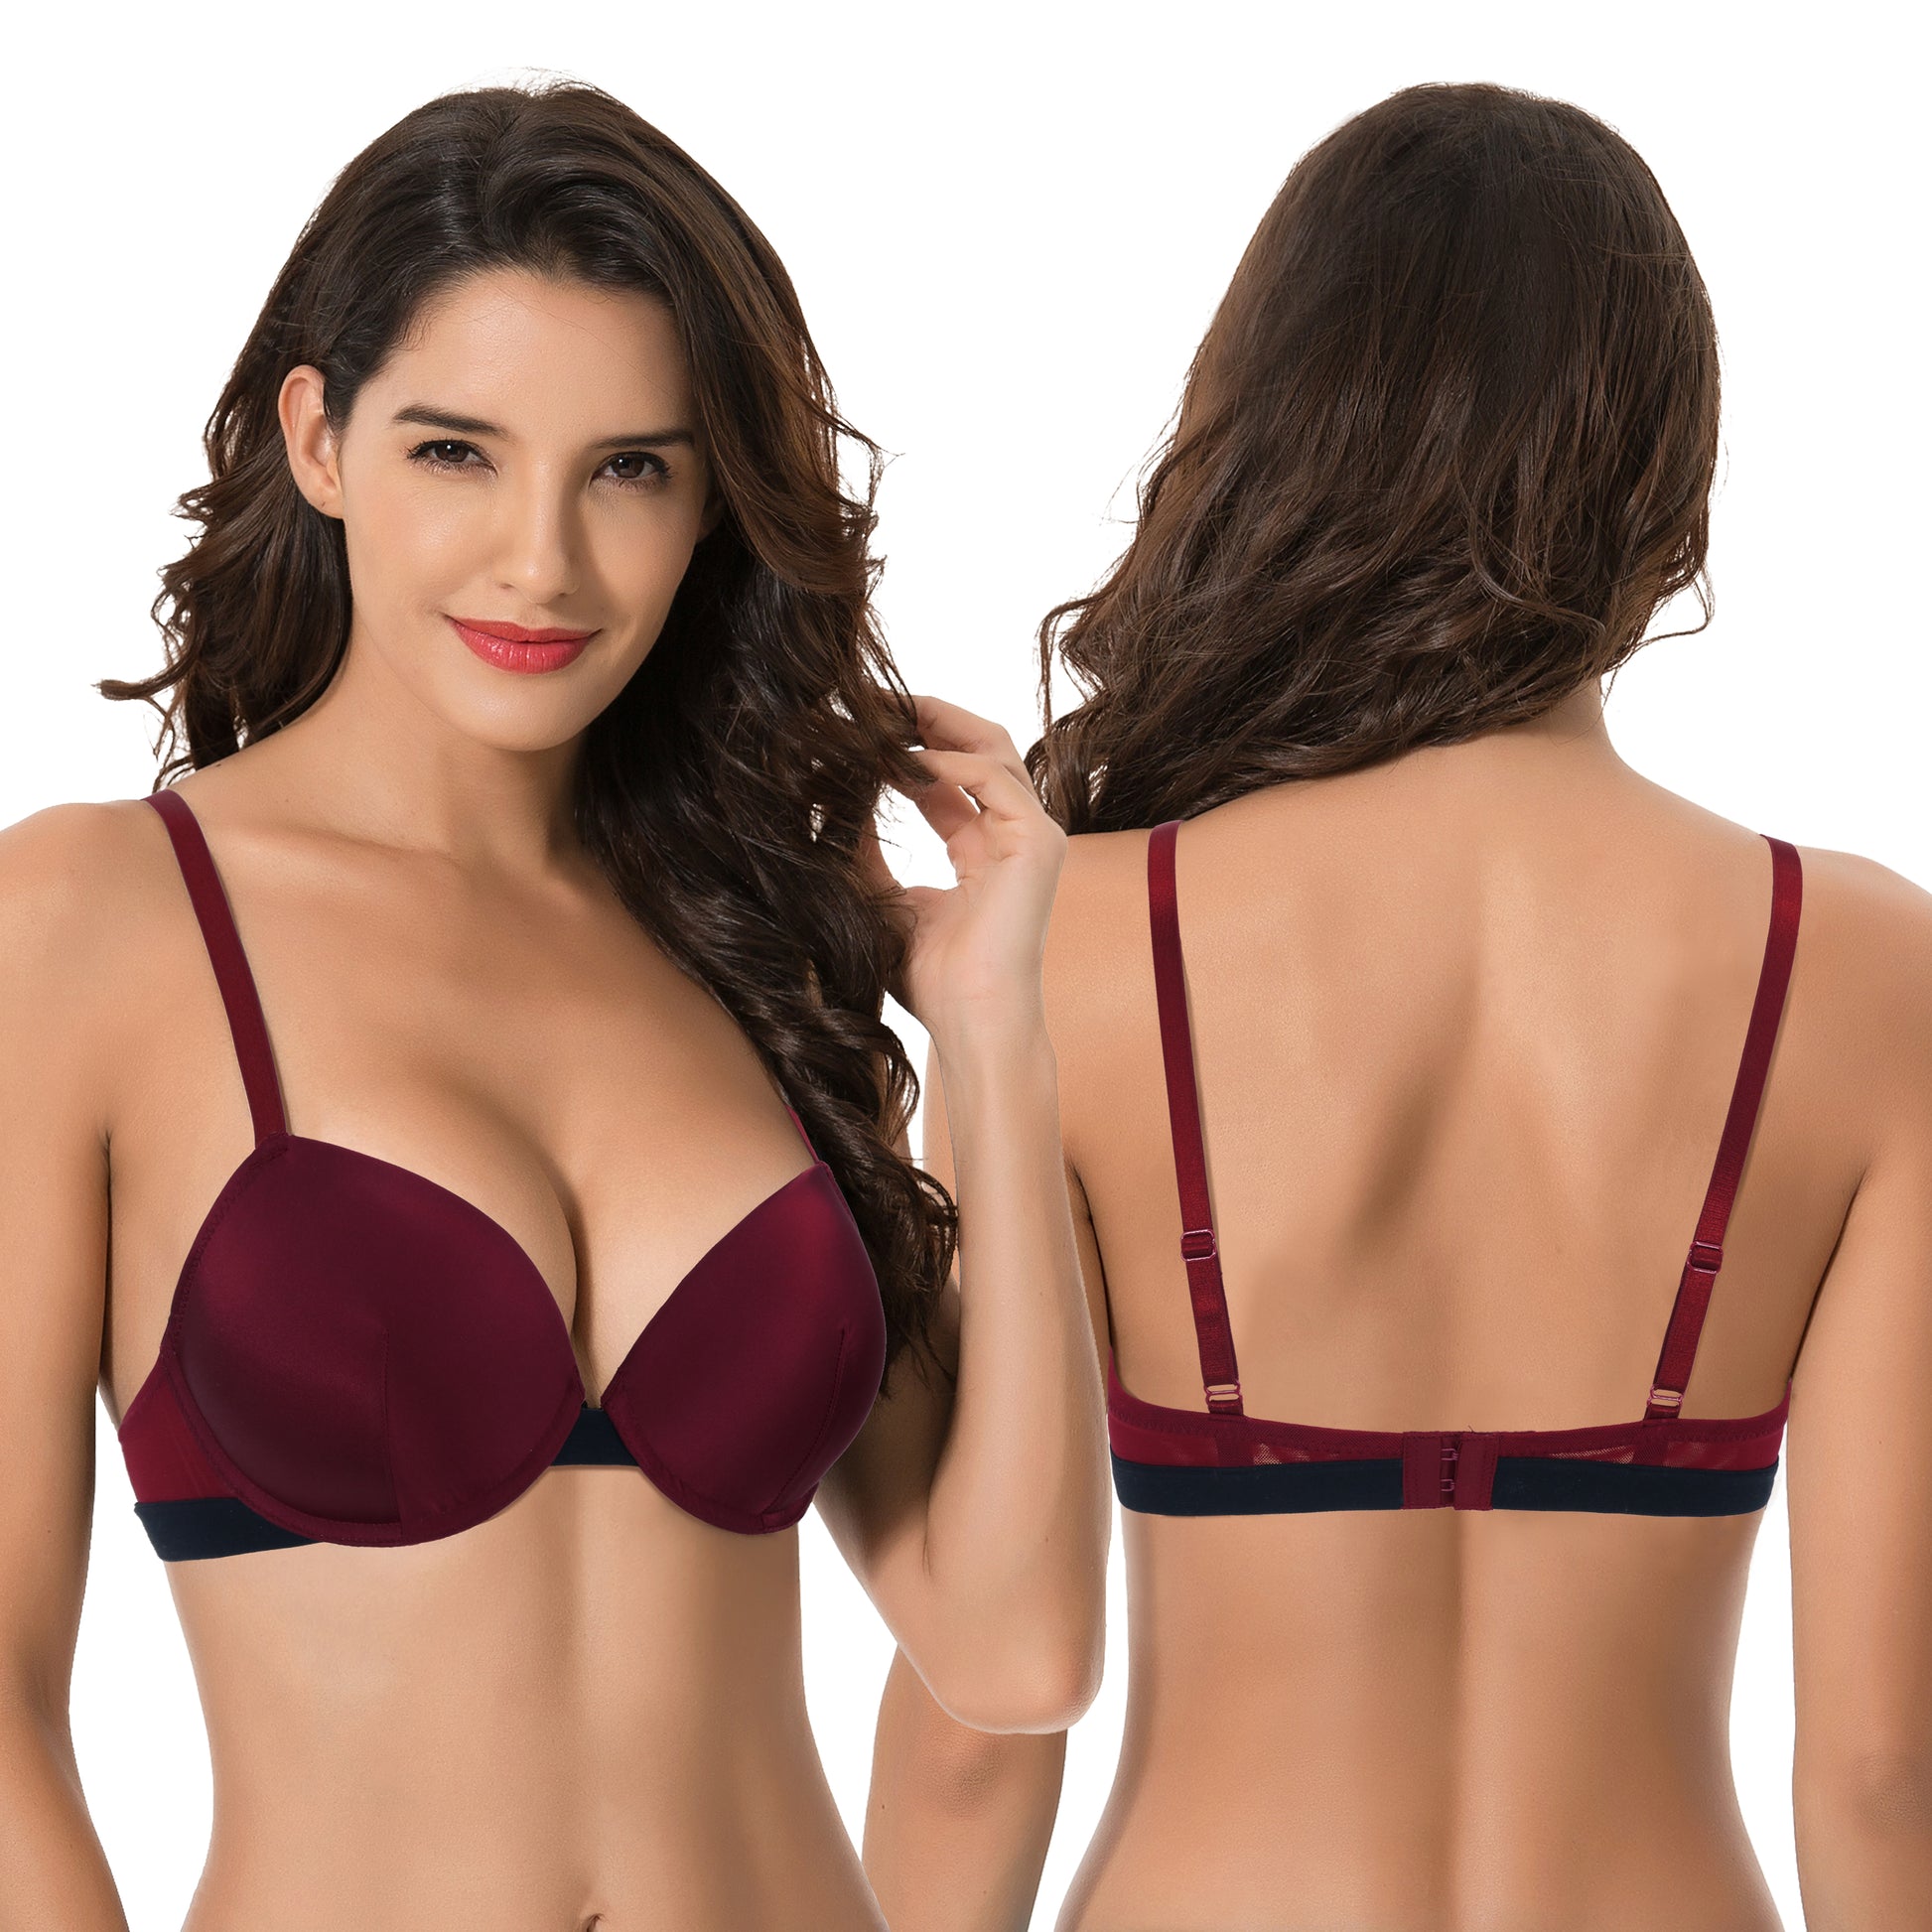 Curve Muse Women's Underwire Plus Size Push Up Add 1 and a Half